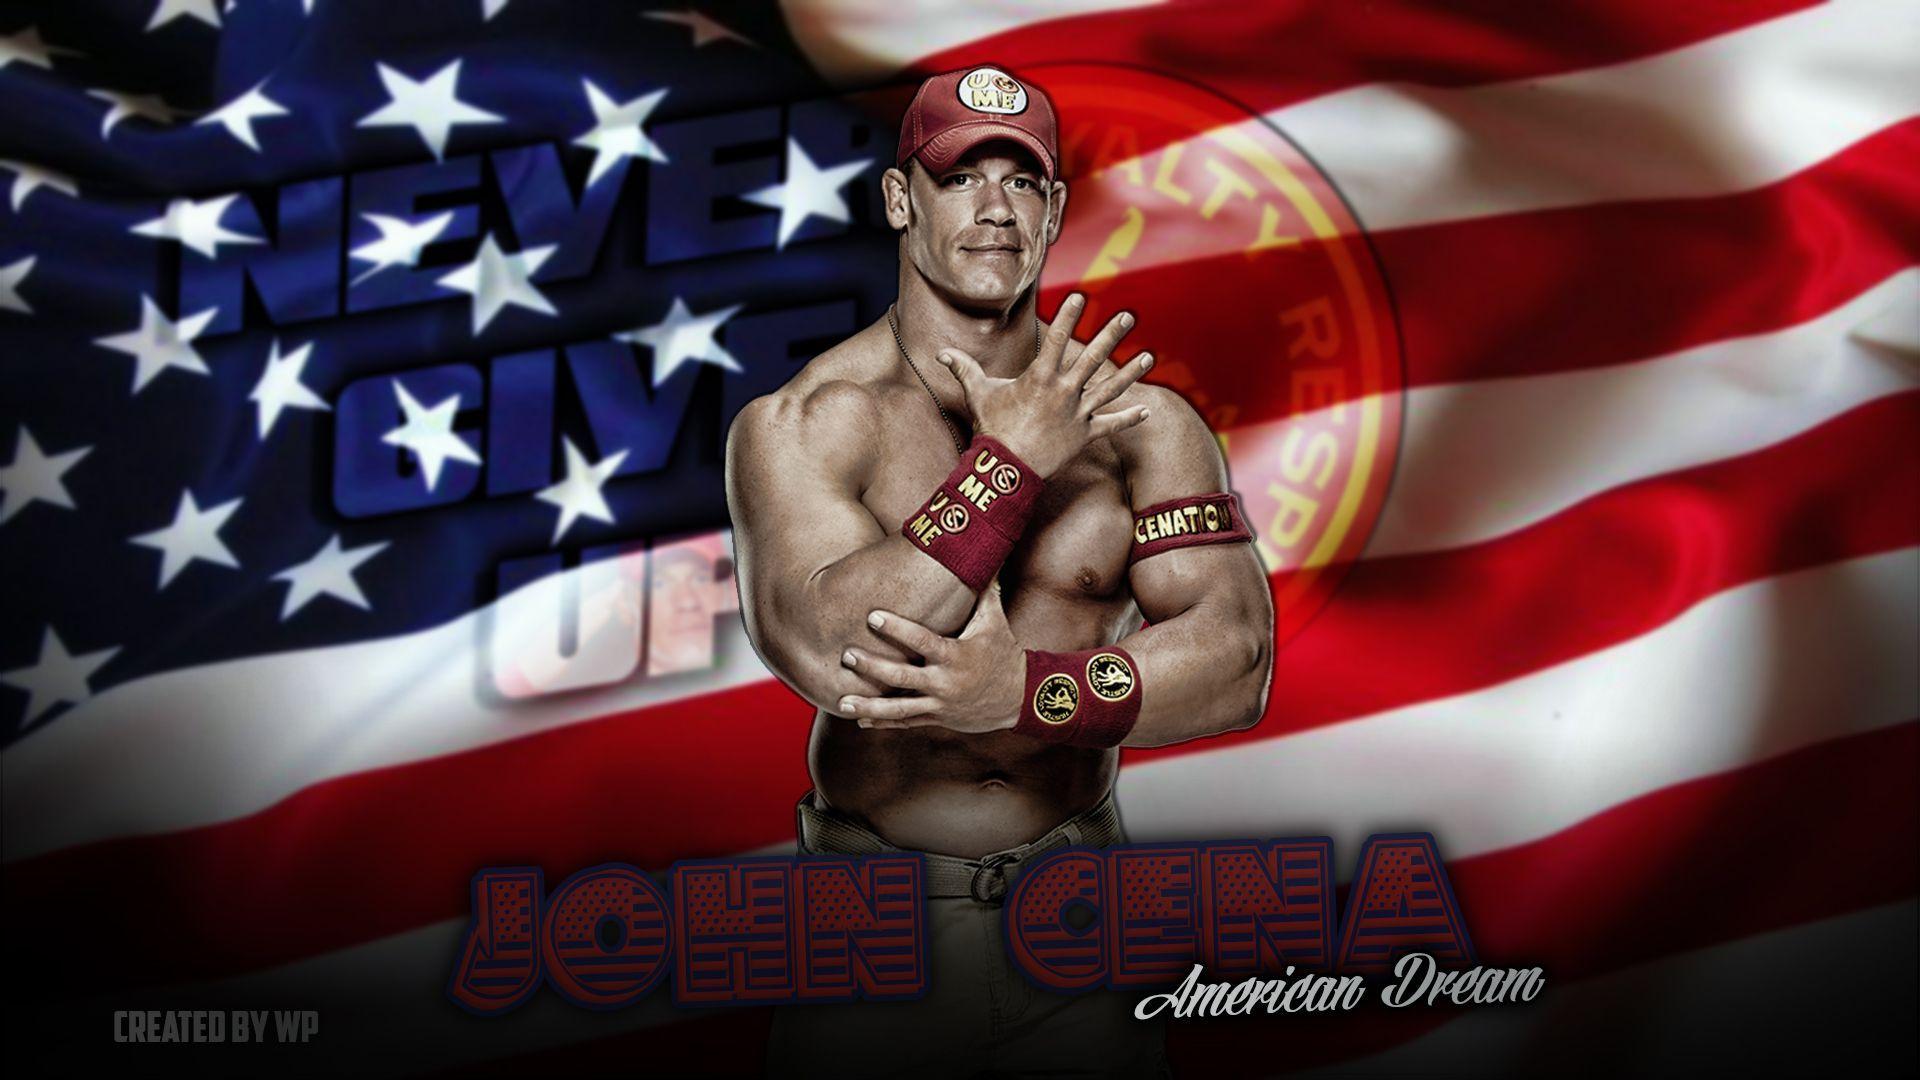 Created By WP Cena 2014 Wallpaper1920x1080